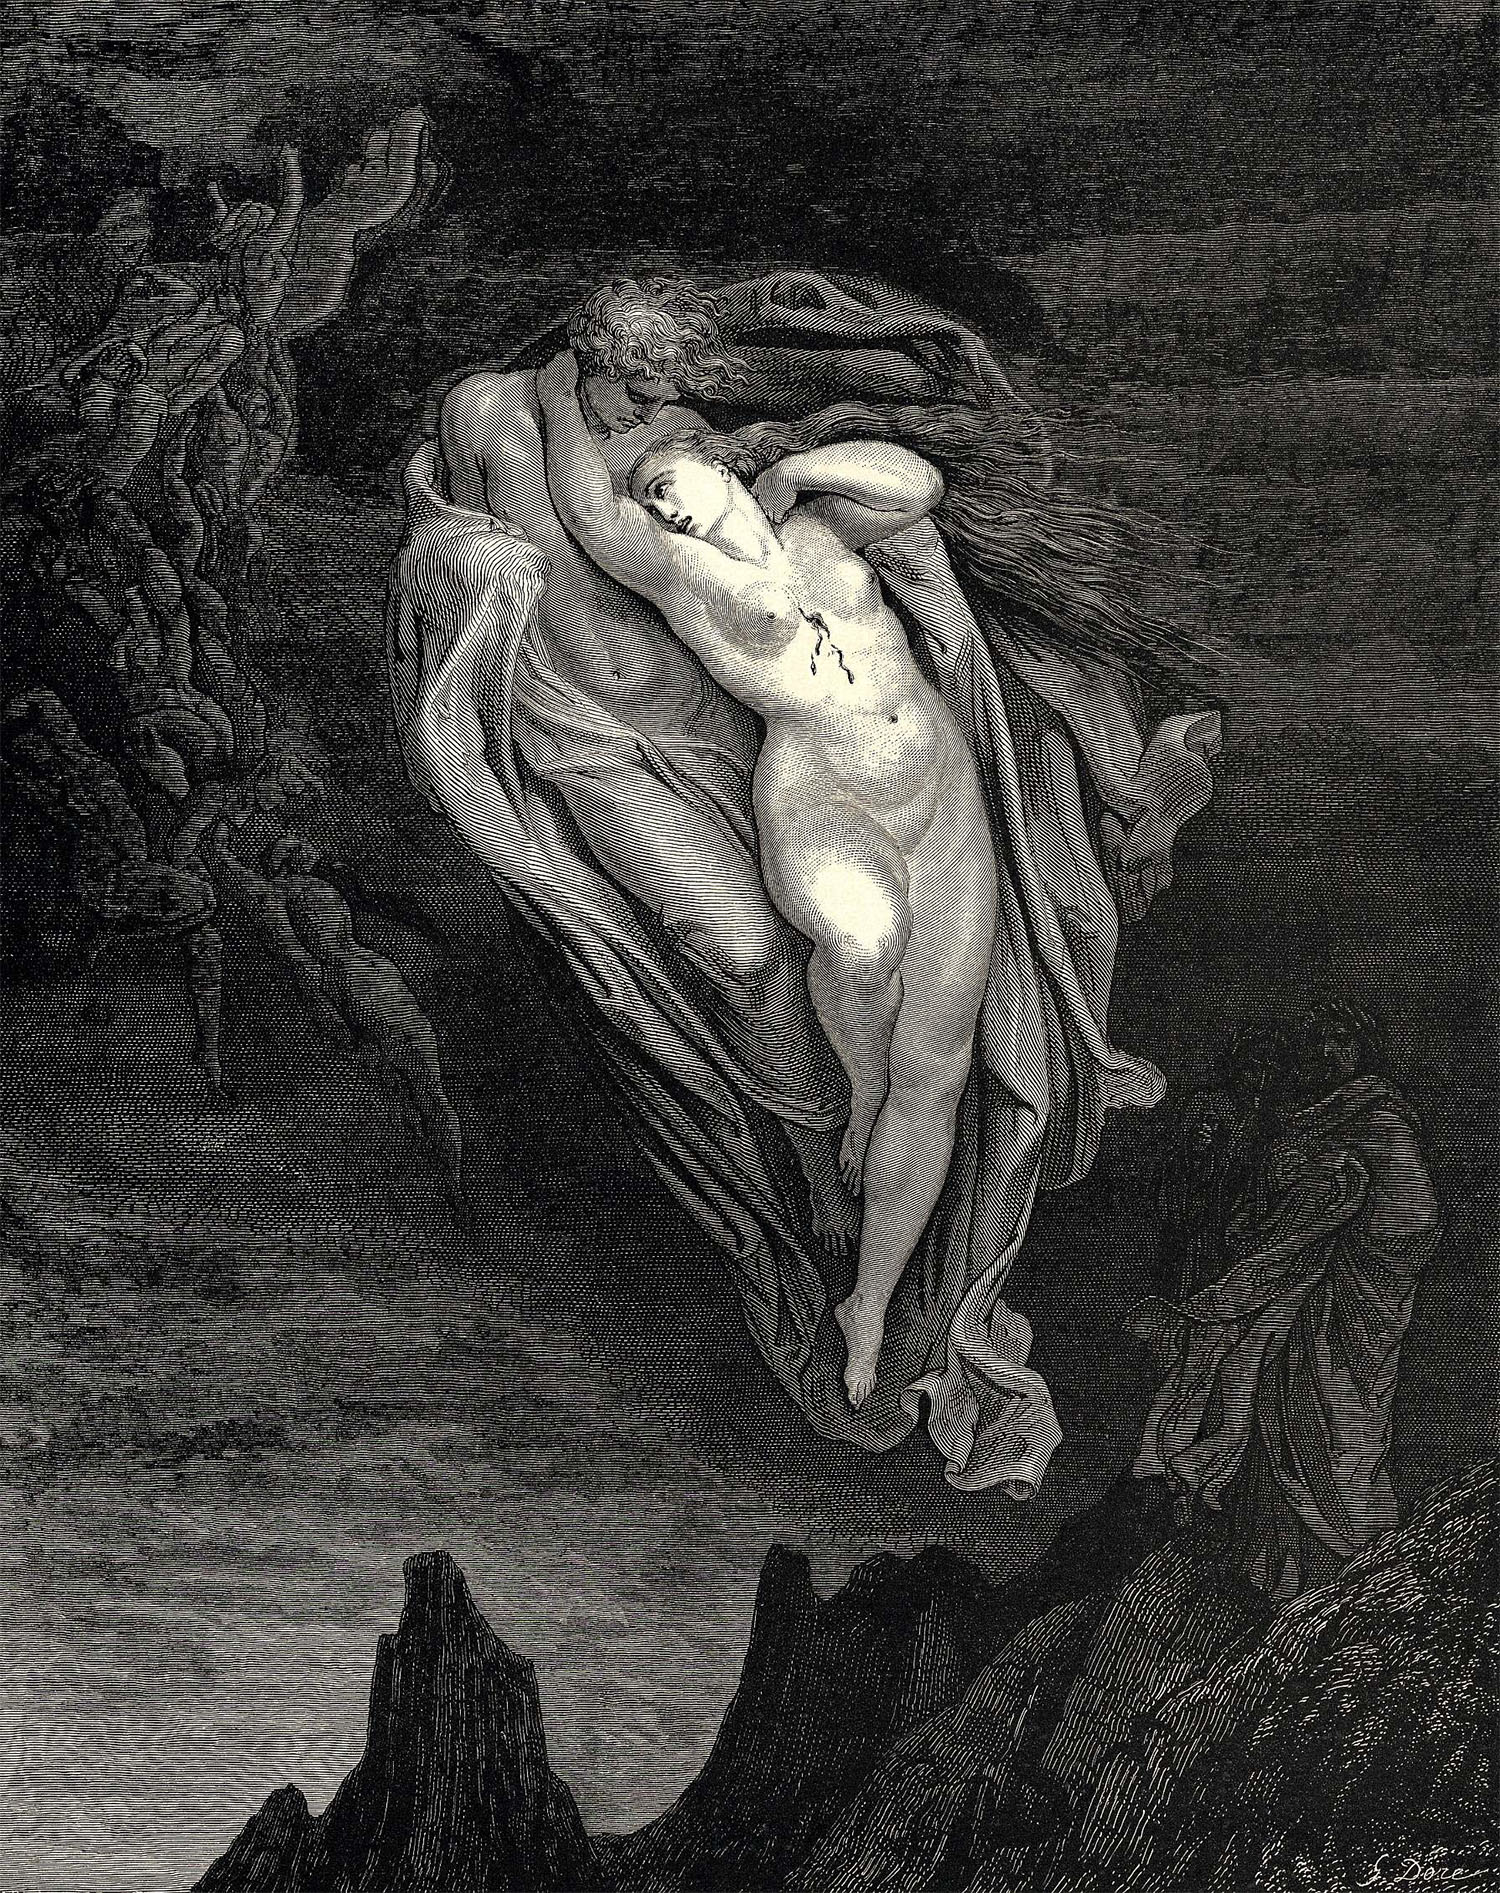 Dante's Inferno: illustrated by Gustave Doré by Dante Alighieri